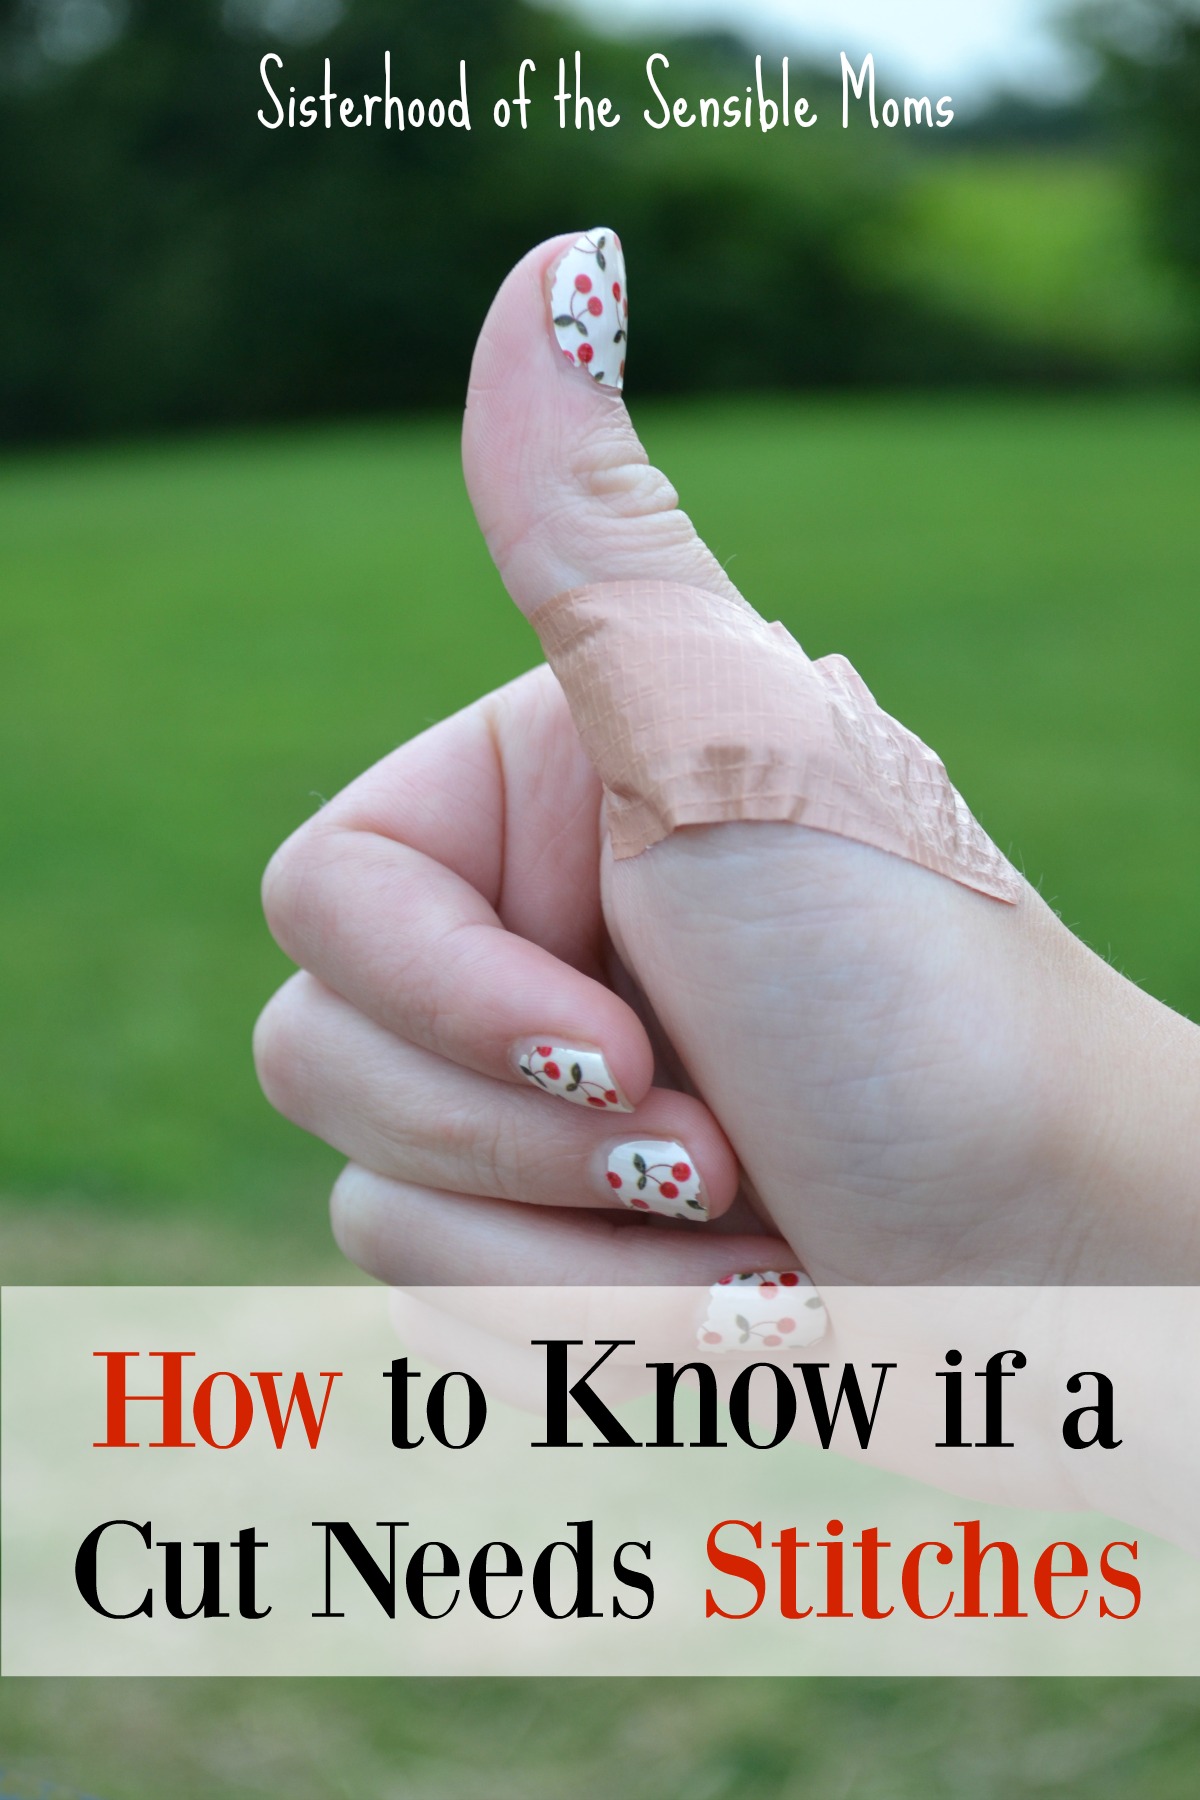 In a quandary about whether or not to head to urgent care? How to know if a cut needs stitches: a helpful guide to help you evaluate the situation. | Health | Parenting | Sisterhood of the Sensible Moms